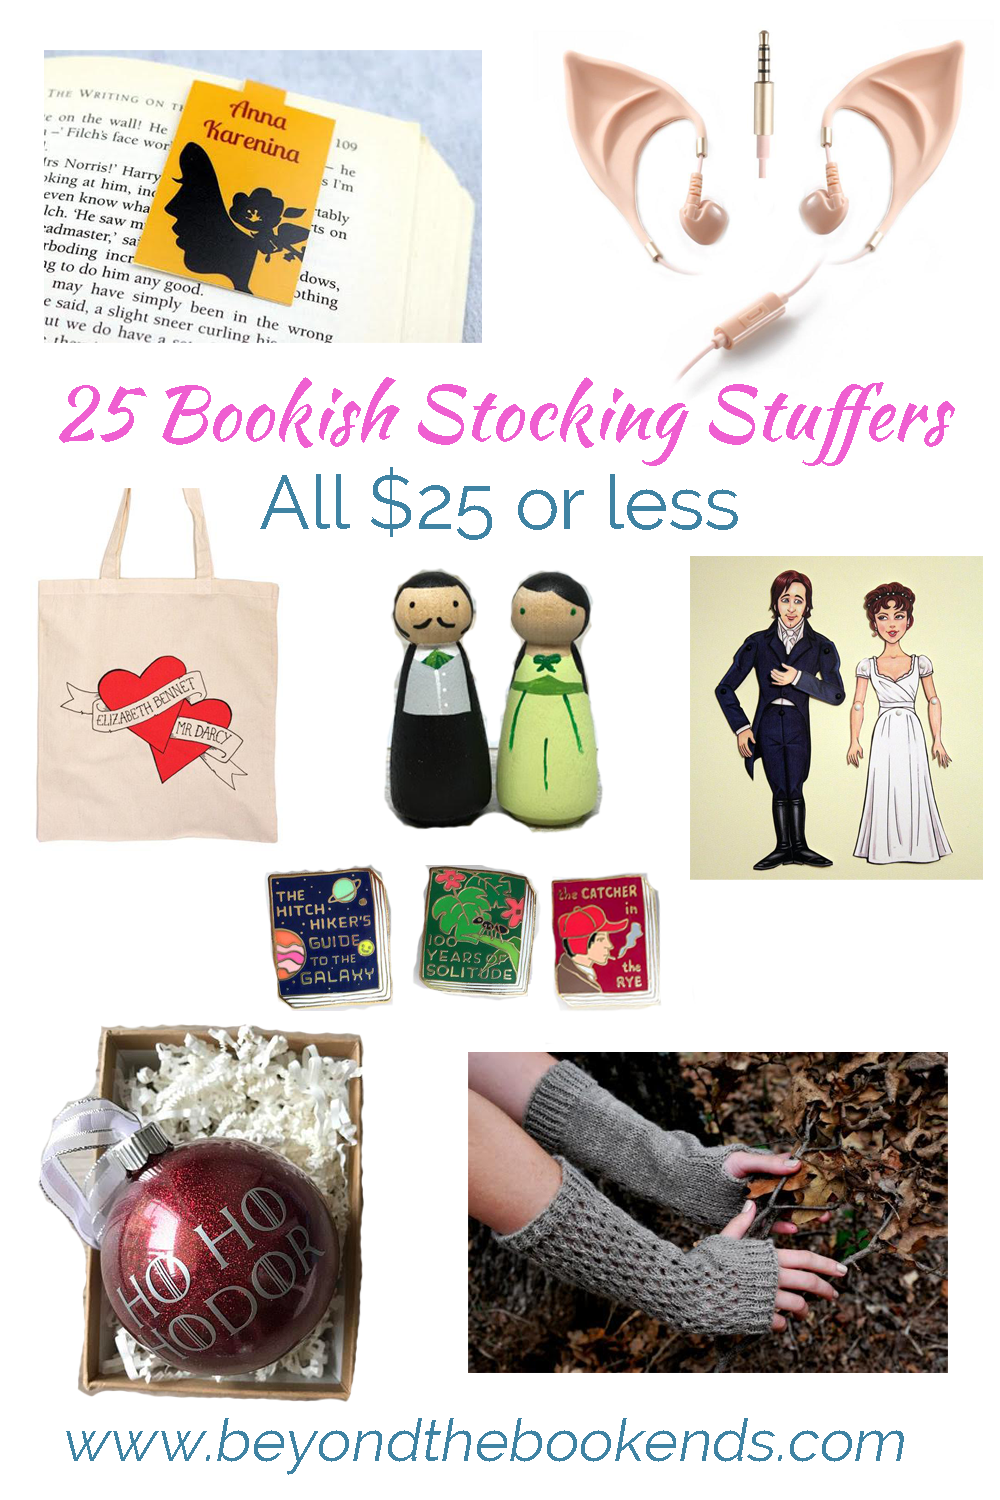 Holy stocking stuffers, batman!! There are tons of cheap bookish stocking stuffers and presents for anyone on your list. Lord of the Rings, Outlander, Games of Thrones and Peter Pan fans will all be pleased with these fun picks!